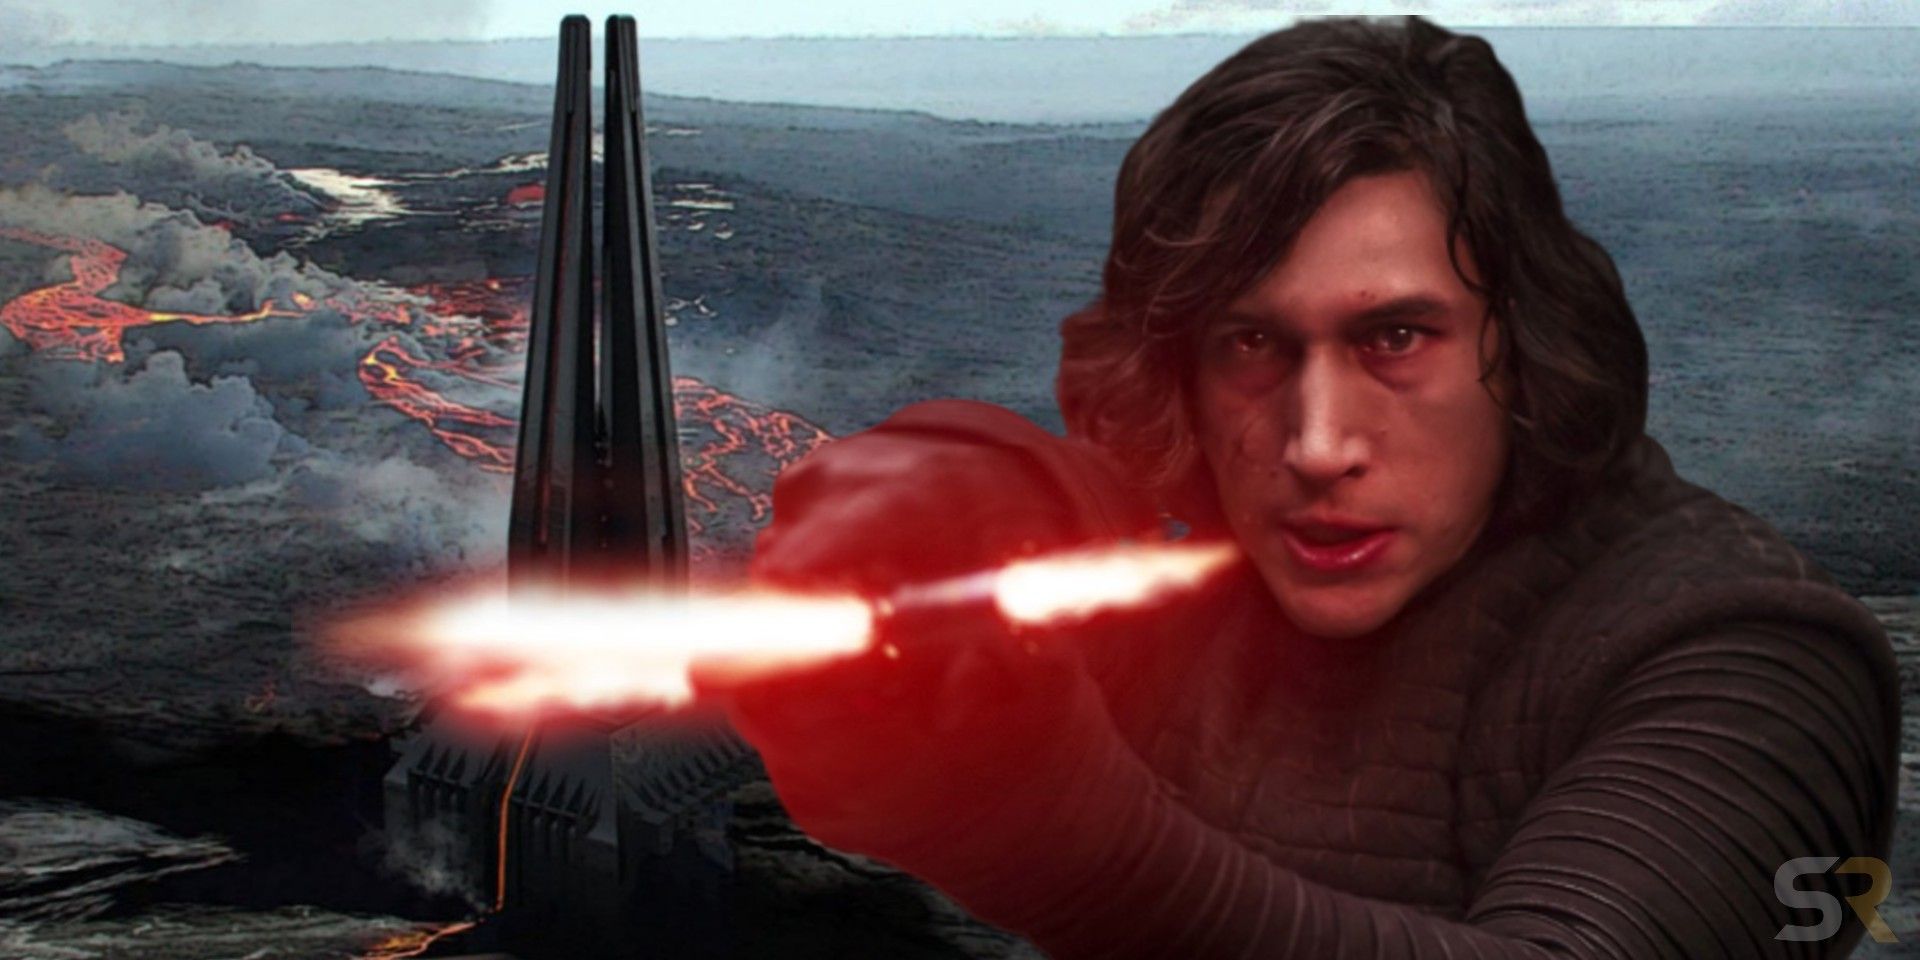 Star Wars Why Mustafar Looks Different In Rise Of Skywalker